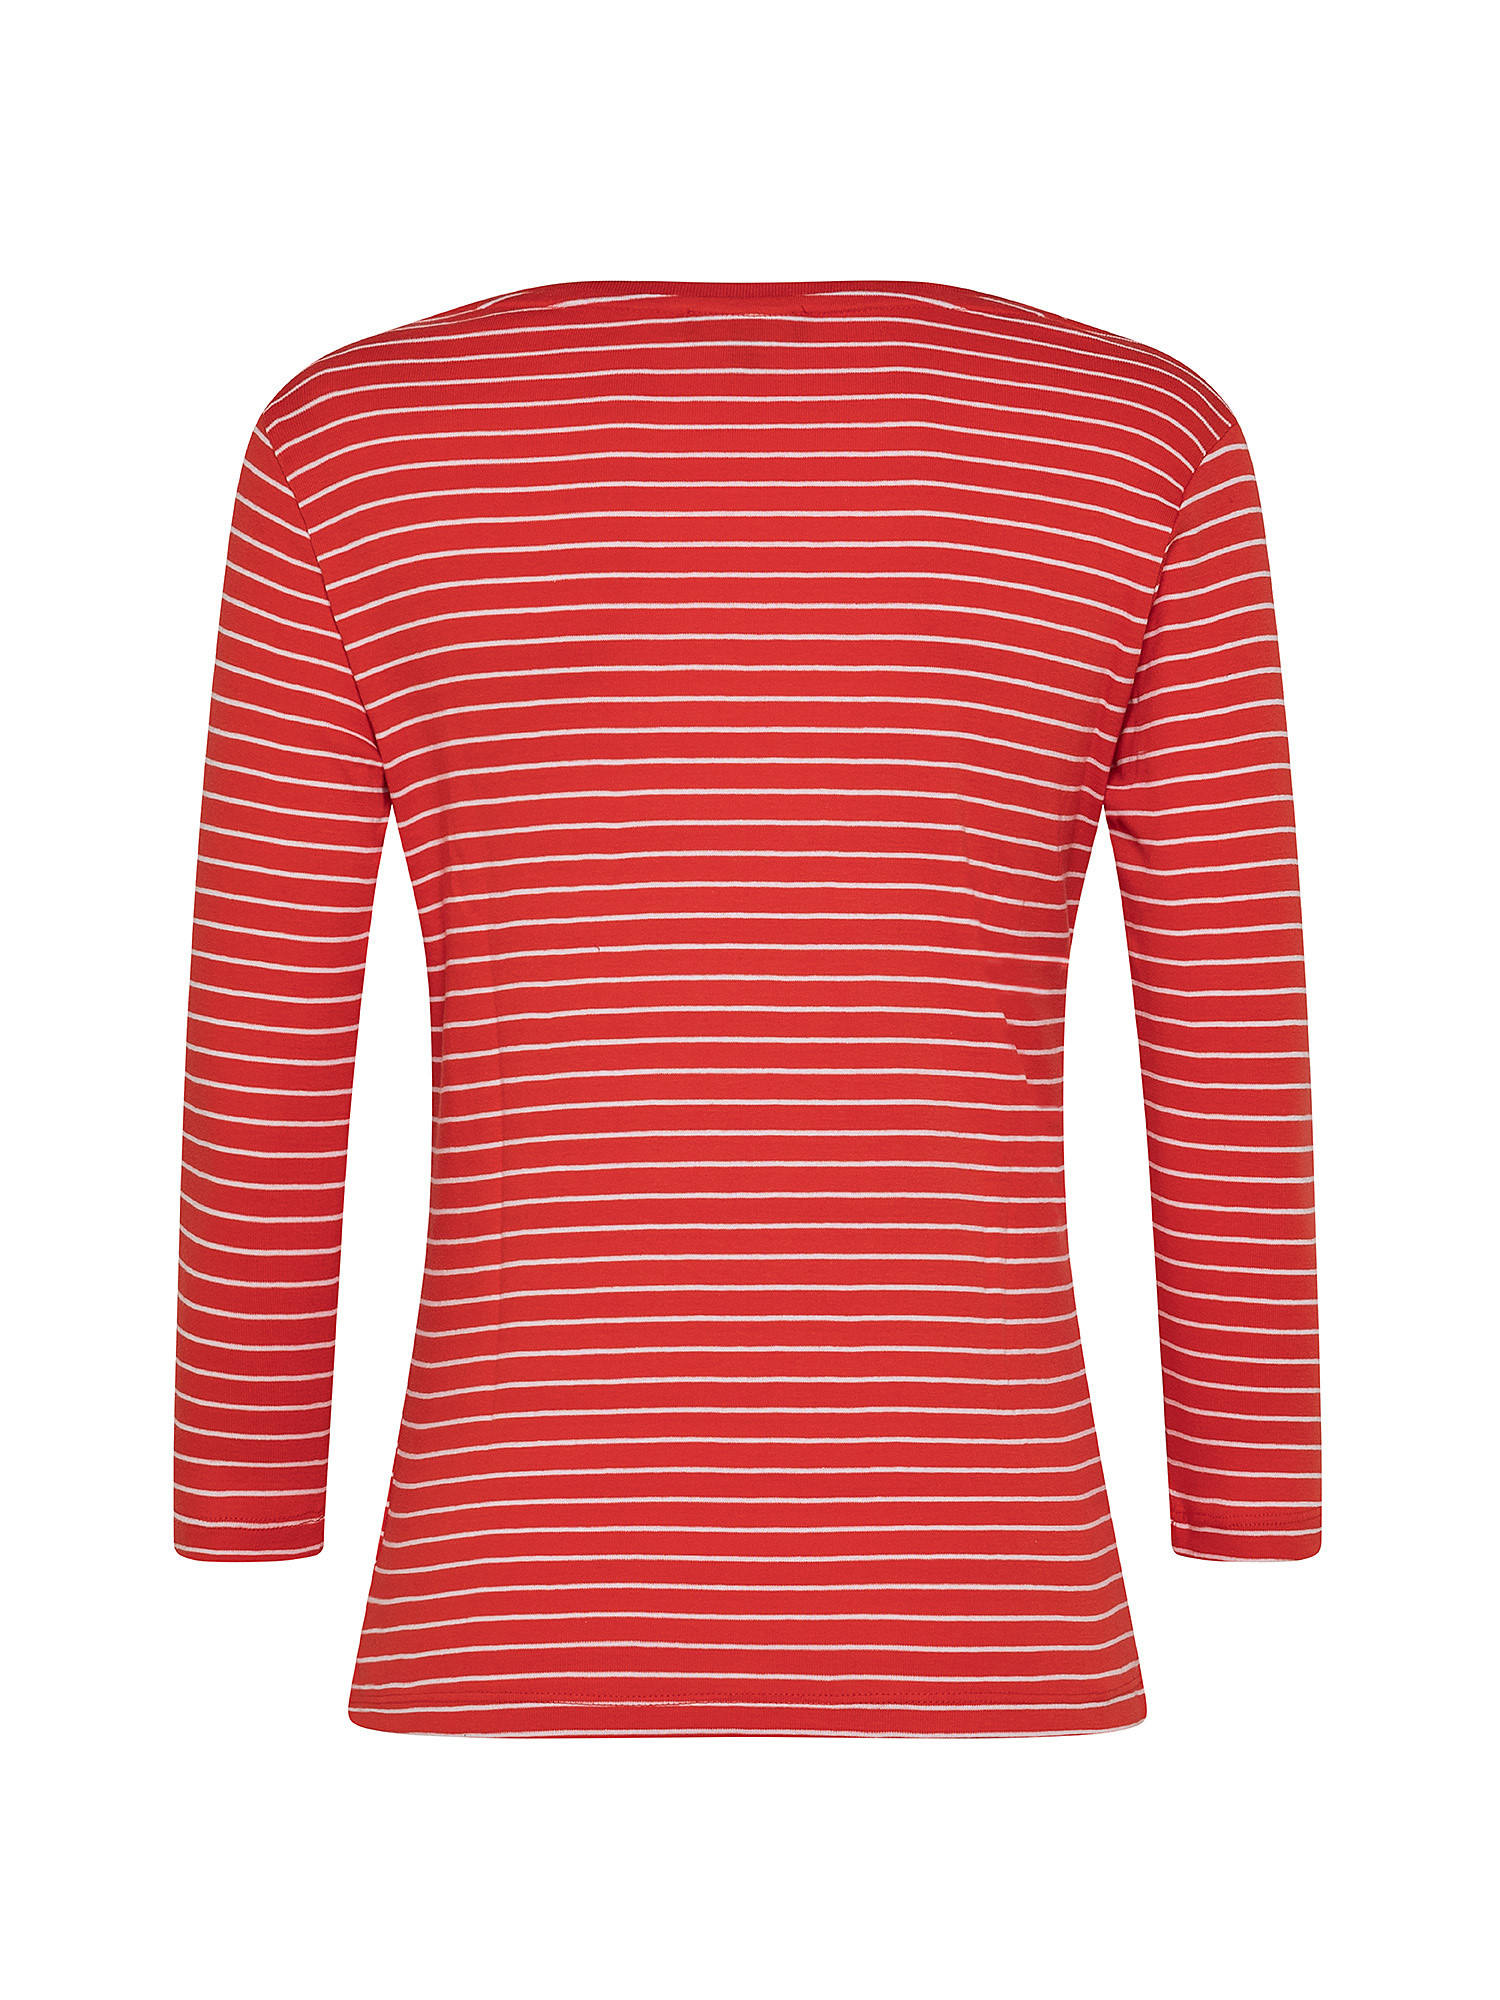 Striped crewneck T-shirt with rhinestones, Red, large image number 1